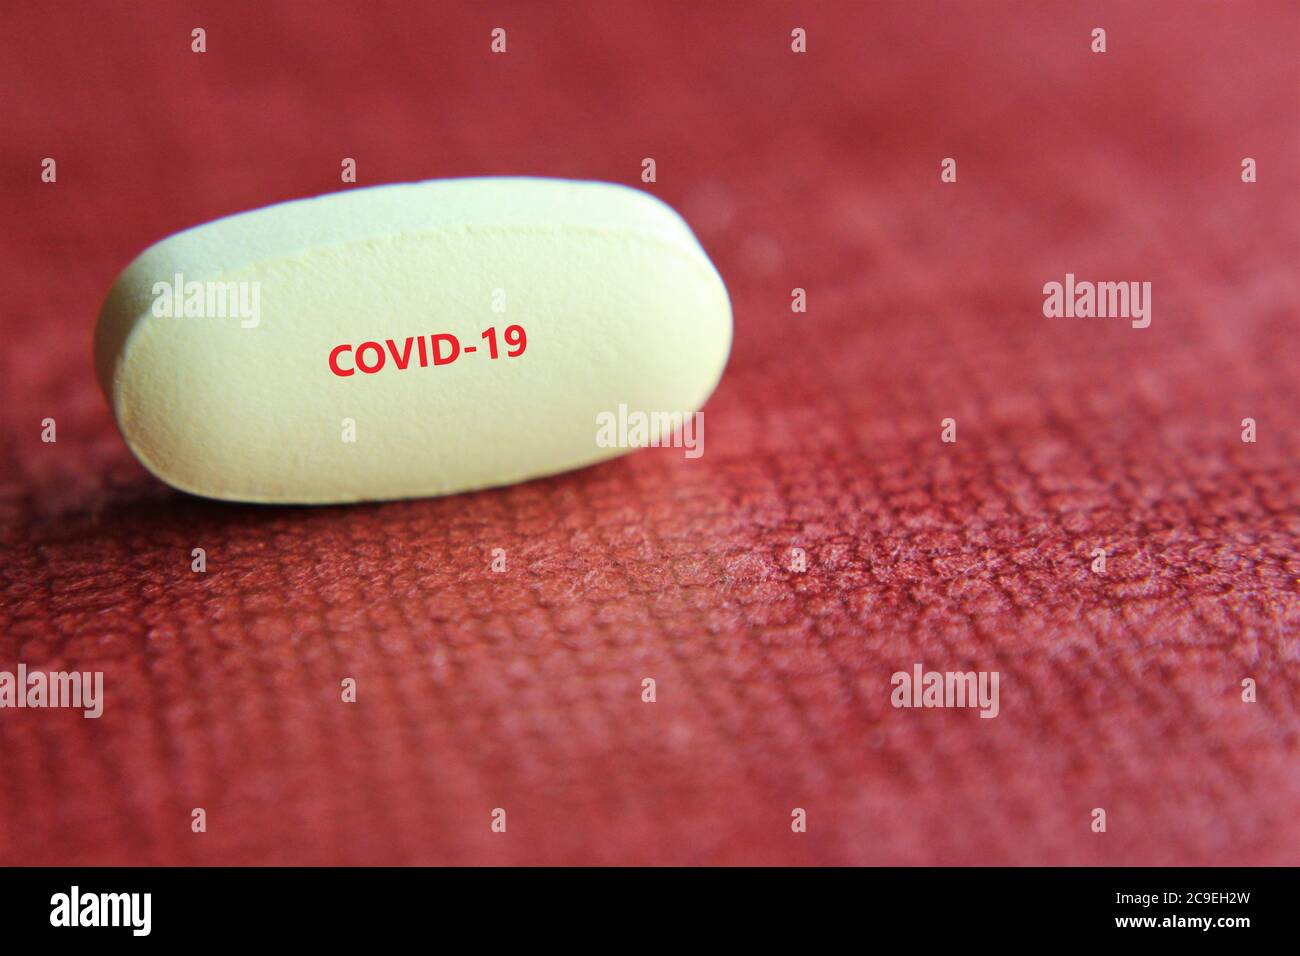 Covid-19 medicine stock photo isolate on red copy space front view Stock Photo